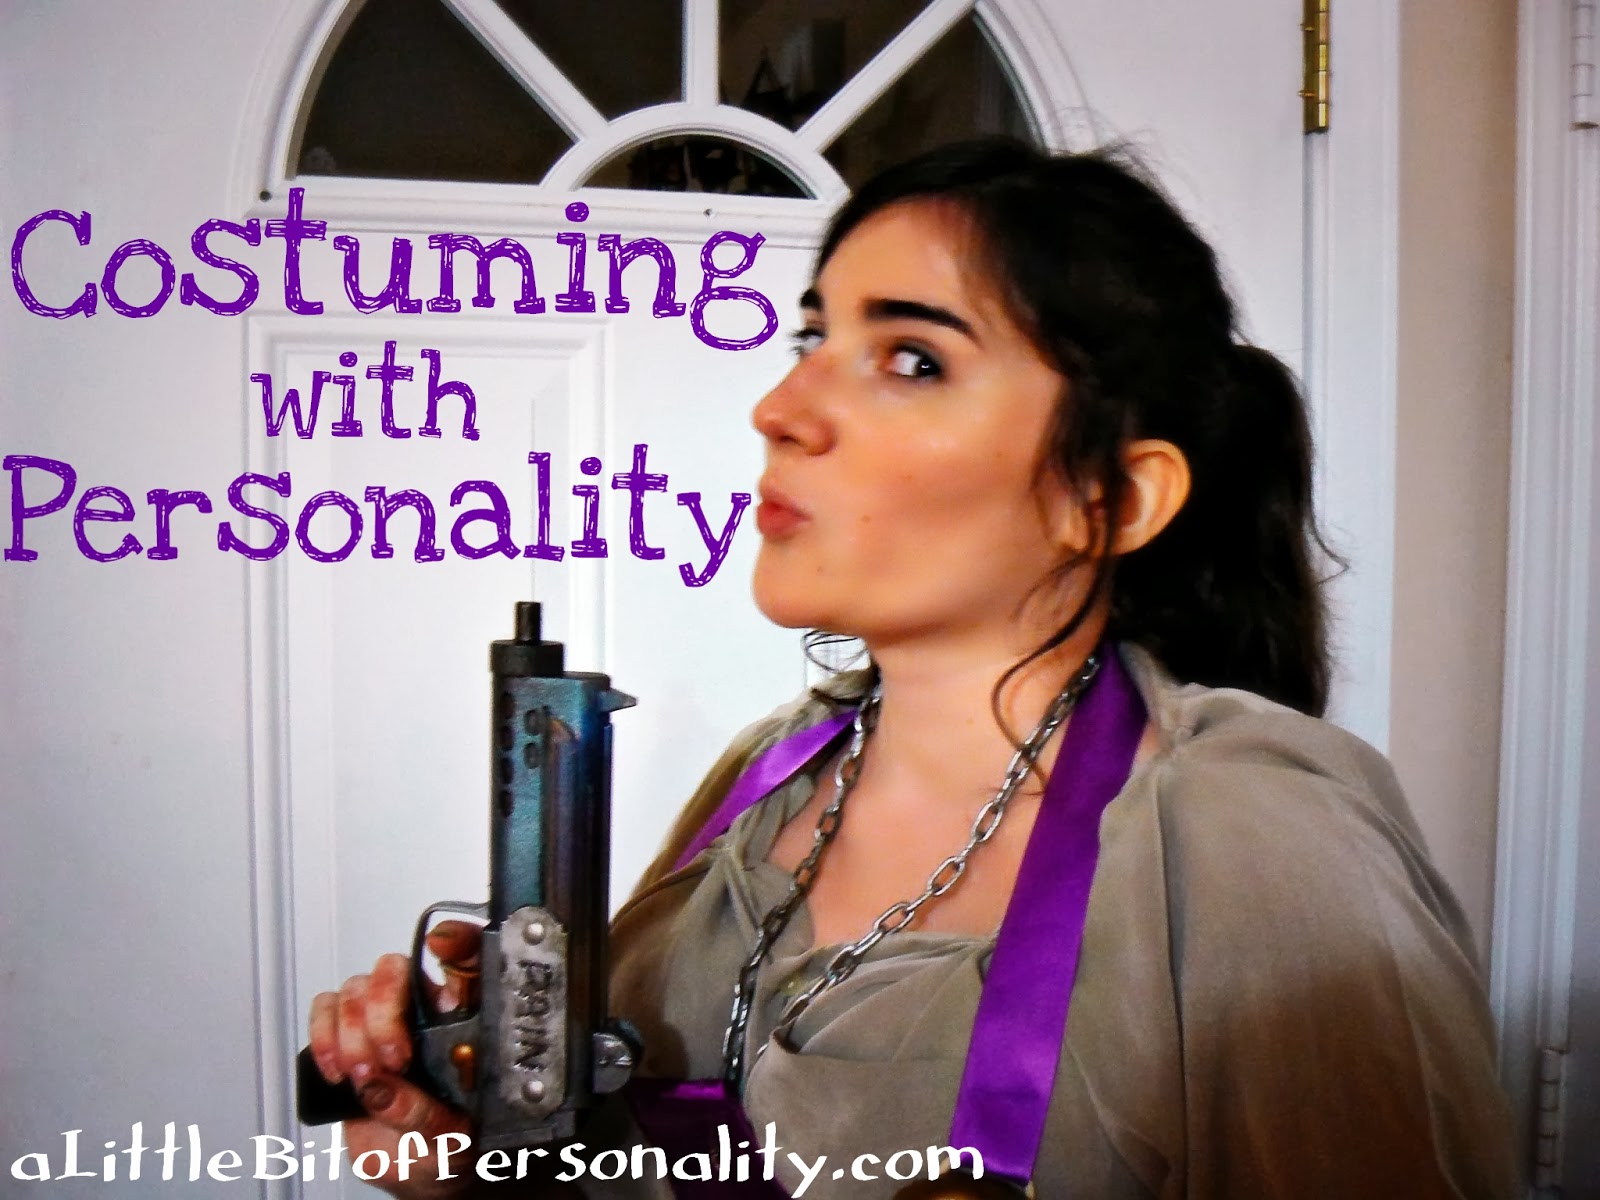 Costuming with Personality - A Little Bit of Personality